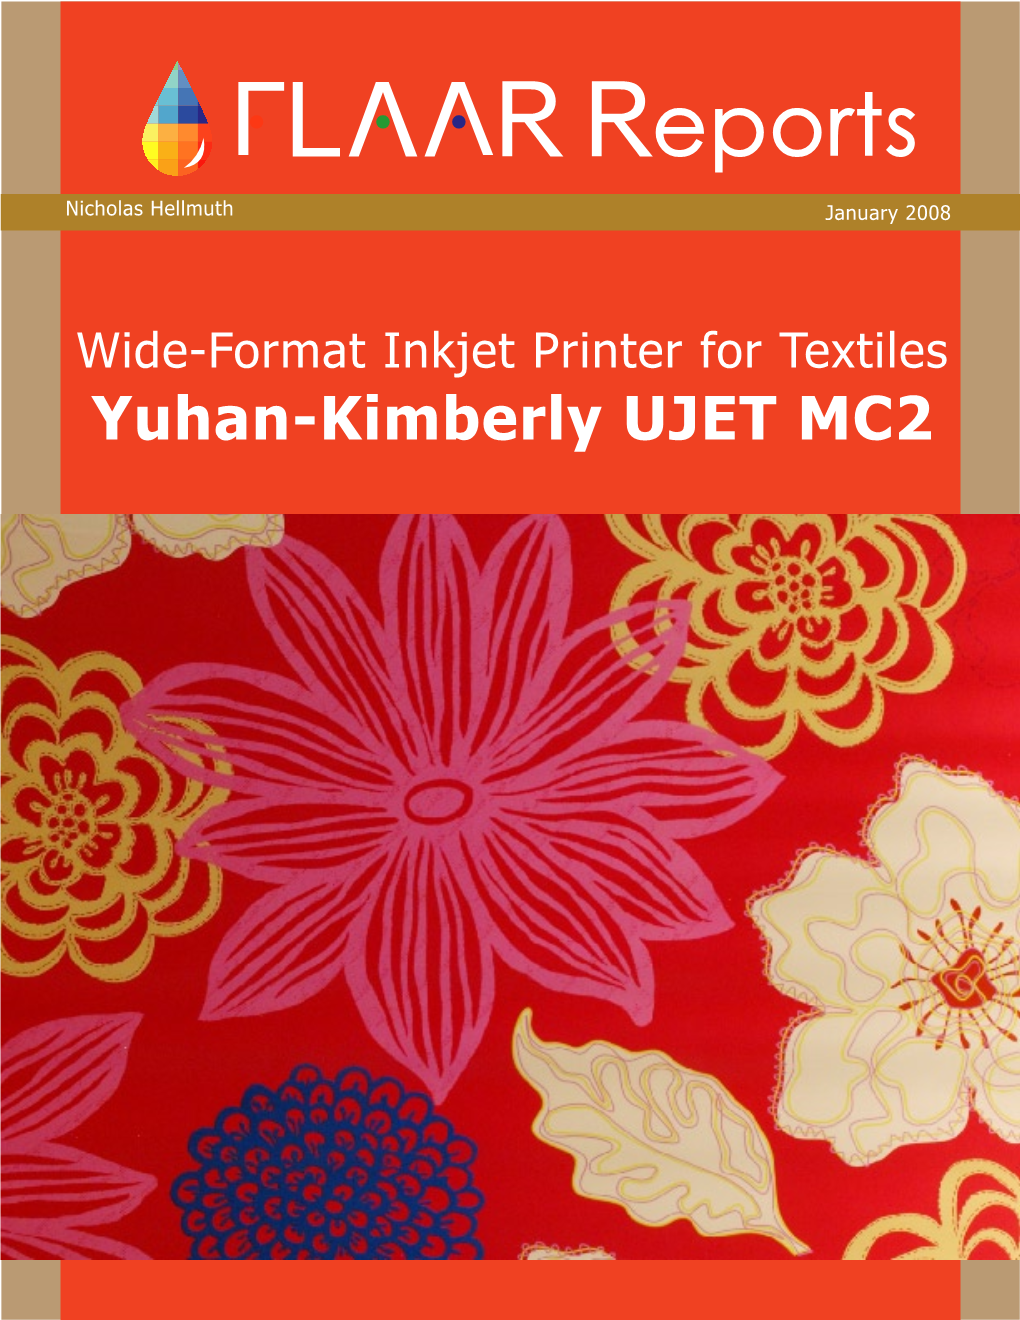 Wide-Format Inkjet Printer for Textiles Yuhan-Kimberly UJET MC2 Contents Introduction 1